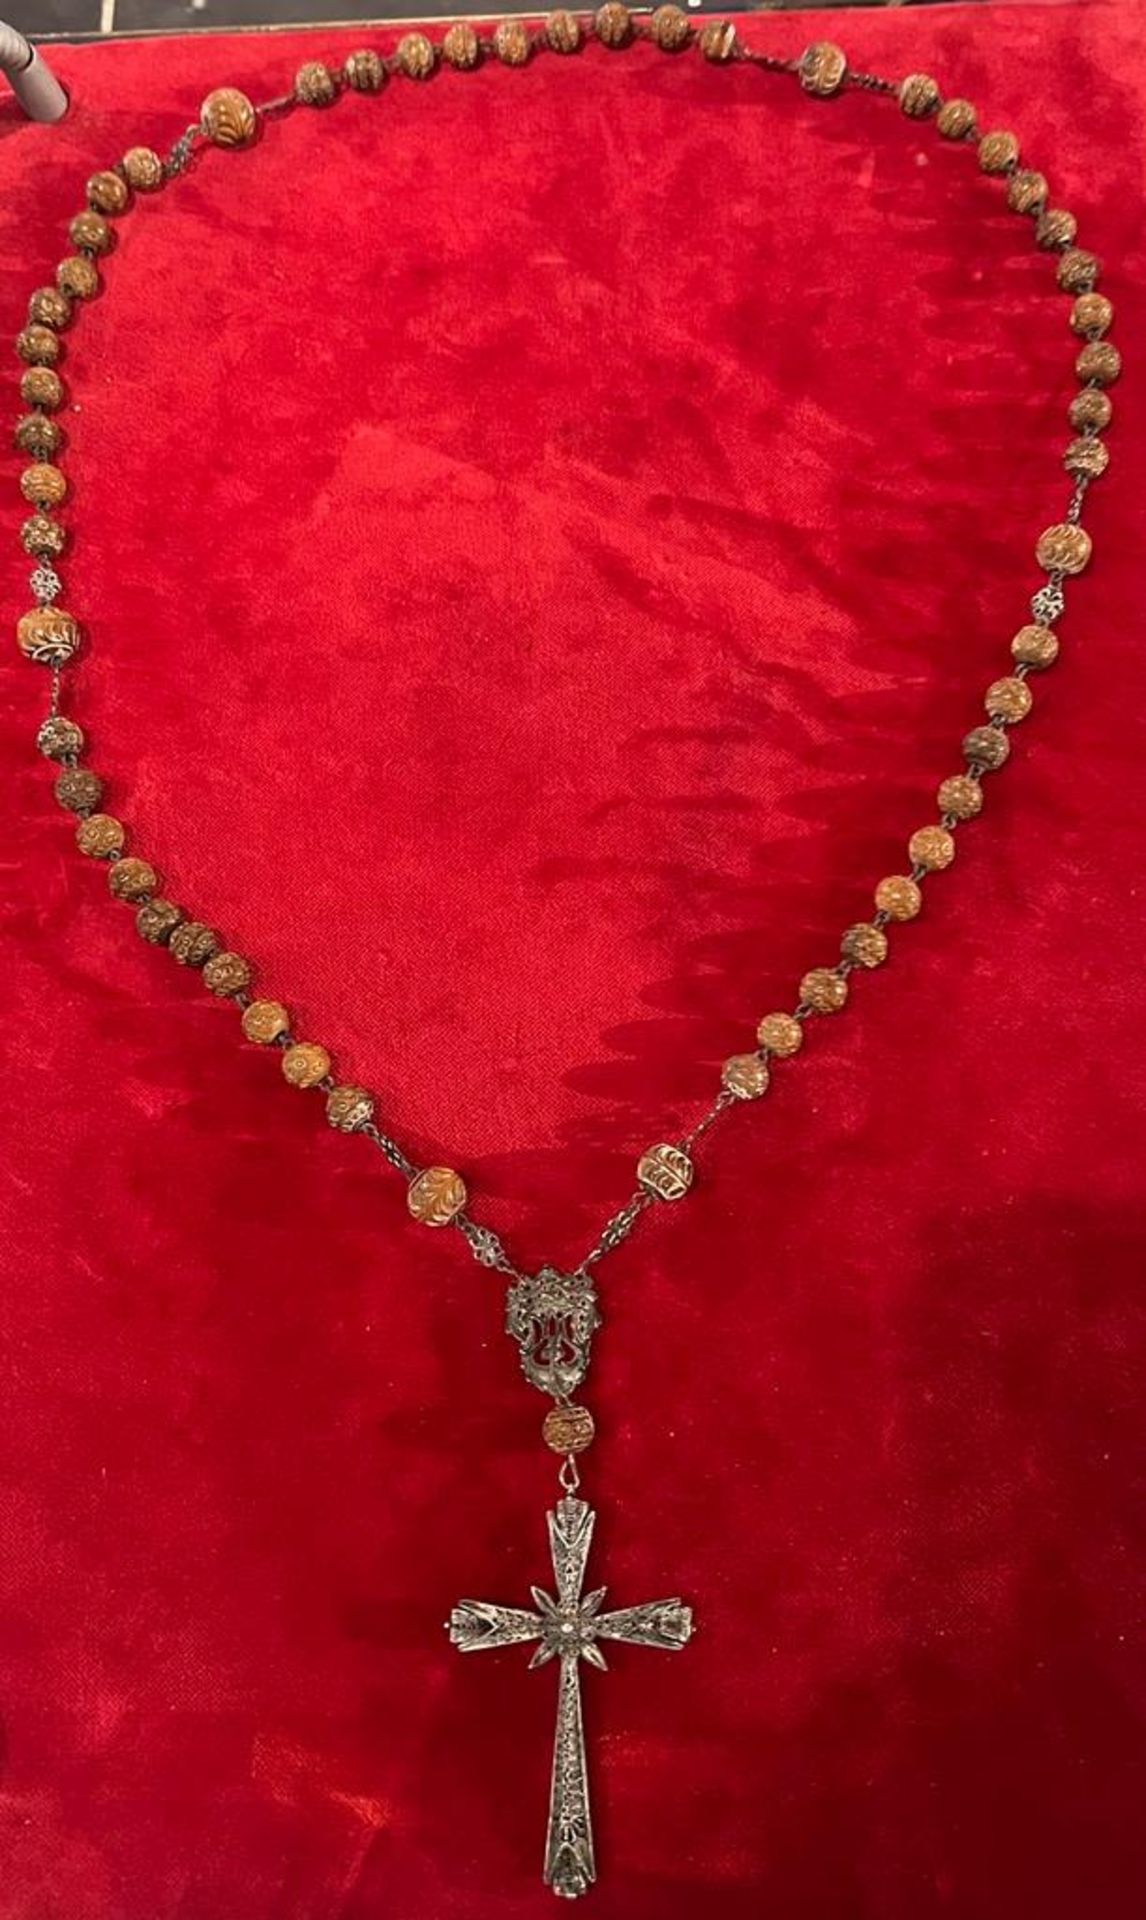 Rare large Portuguese or Spanish colonial Rosary in Coconut beads and fine silver filgree, 18th cent